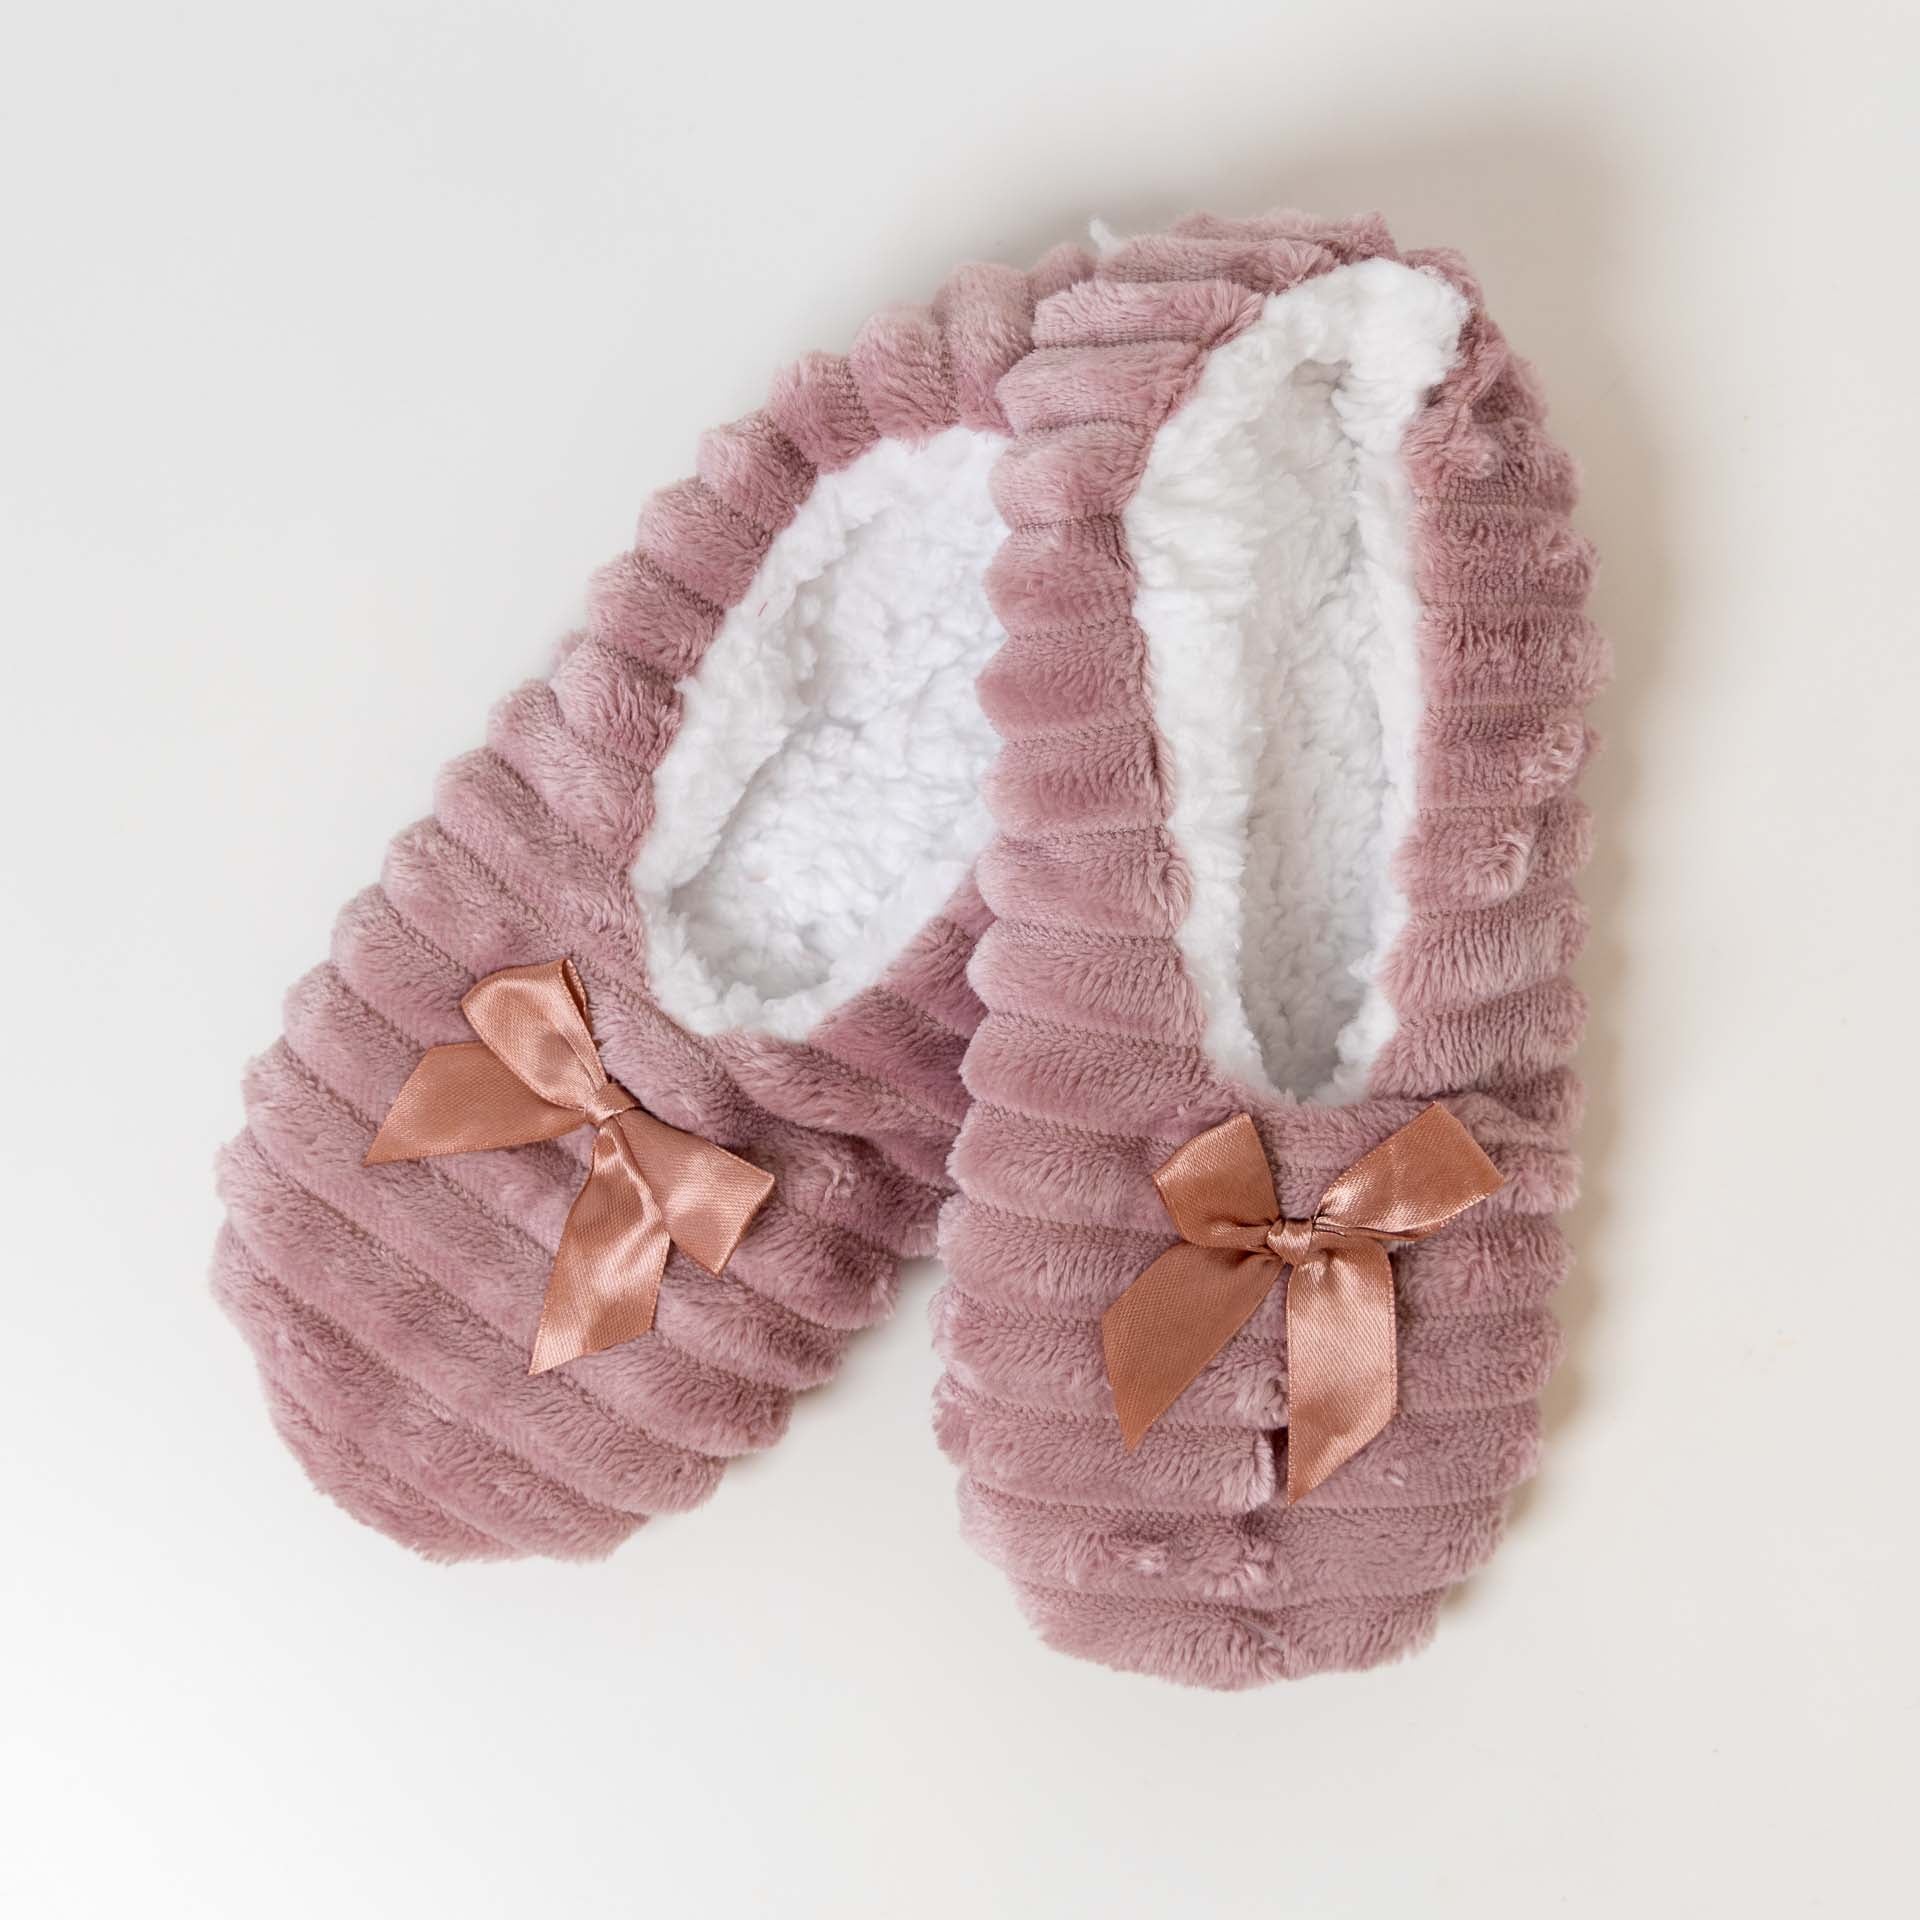 Cashmere & Musk "Be Kind to Yourself" Slippers Gift Set